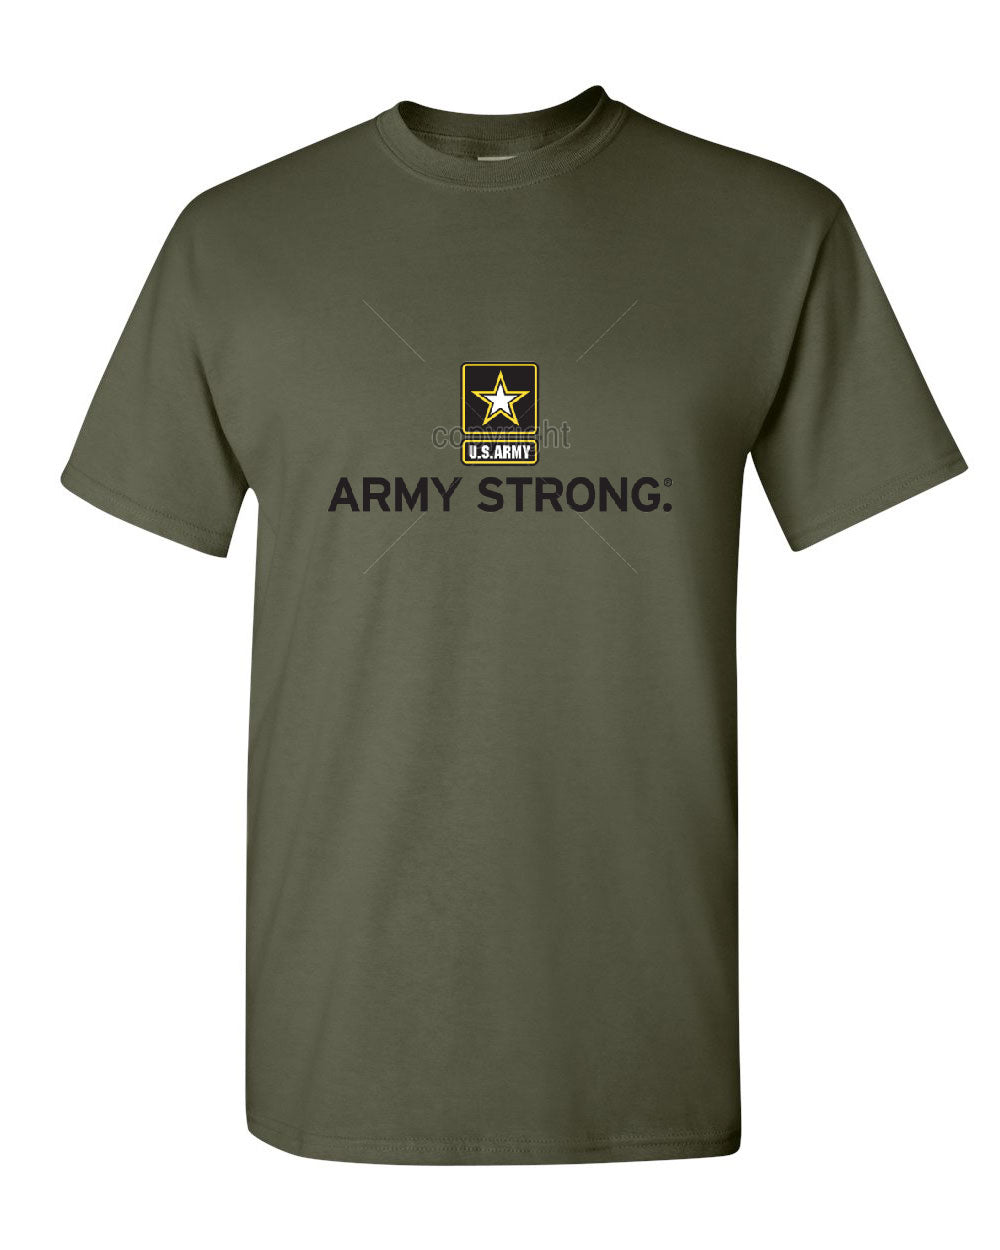 Army Strong T-Shirt United States Army Military Soldier Tee Shirt